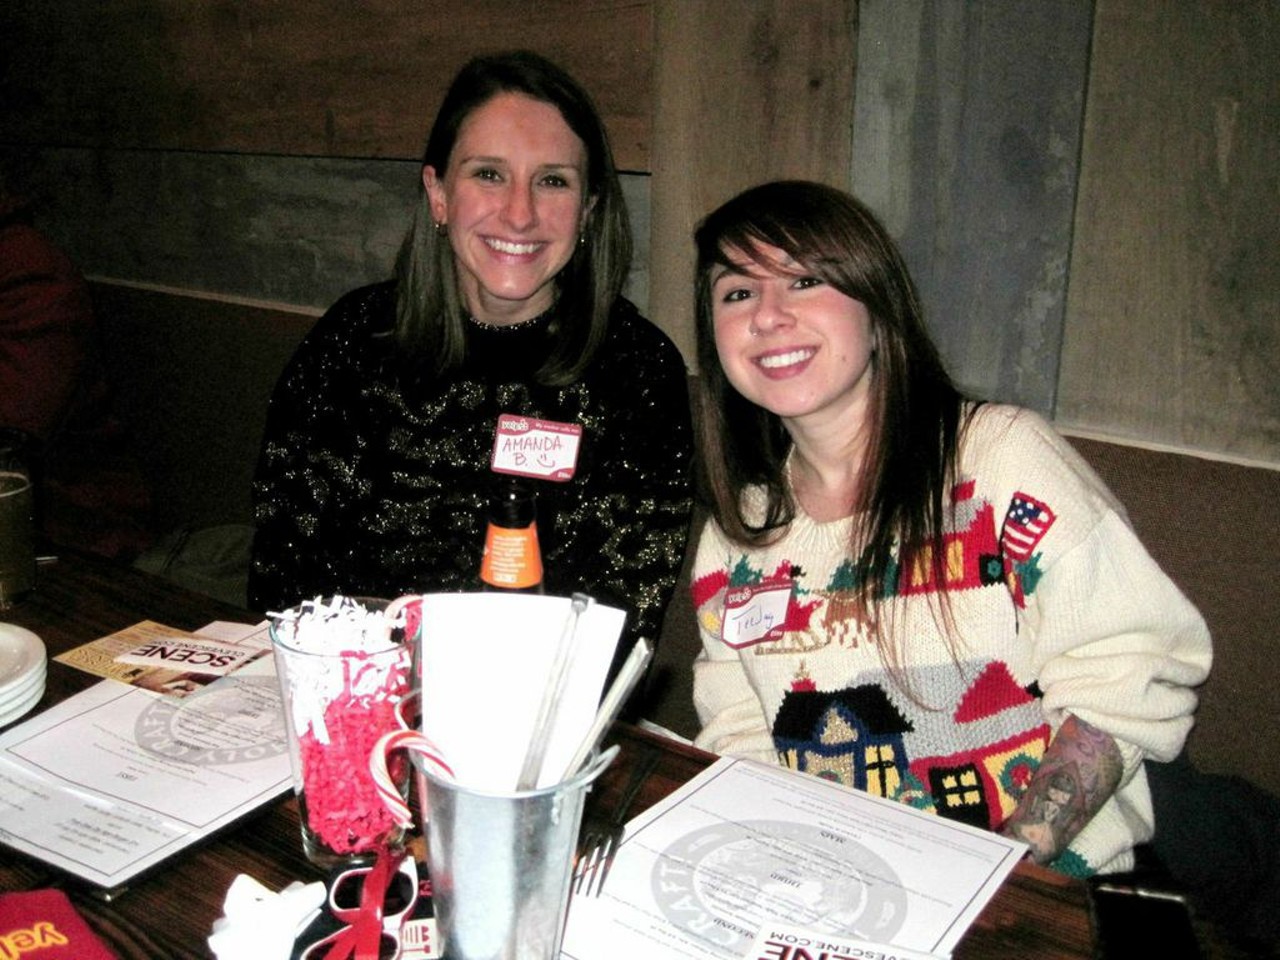 Fun Photos of The Scene Events Team at Yelp's Hoppy Holidaze Elite Party at Holy Craft!